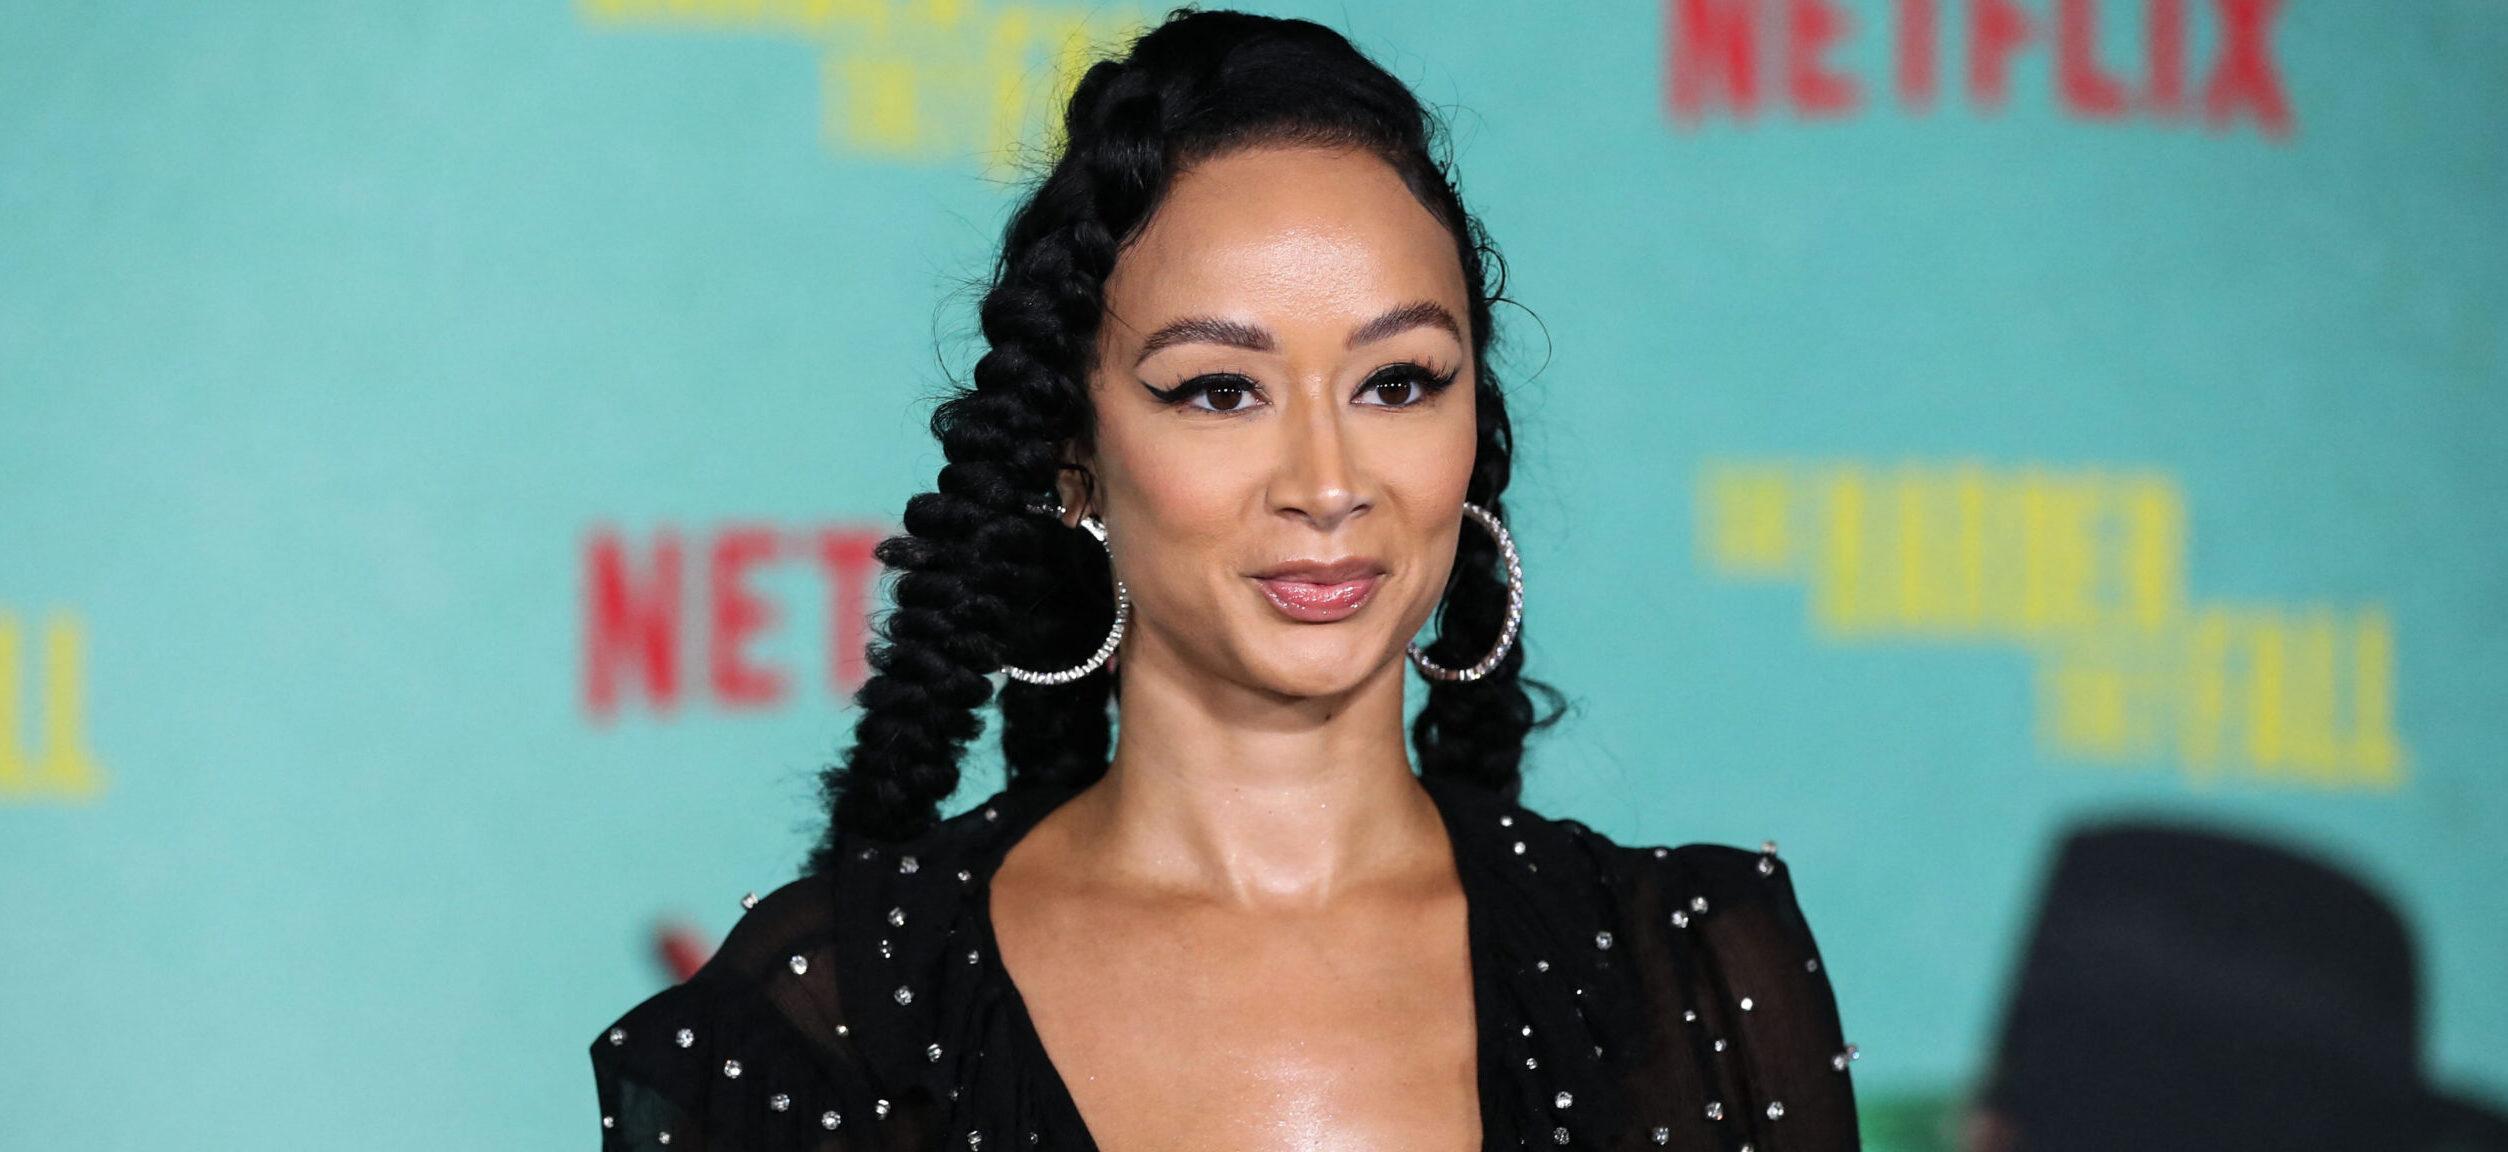 LOS ANGELES, CALIFORNIA, USA - OCTOBER 13: Los Angeles Premiere Of Netflix's 'The Harder They Fall' held at the Shrine Auditorium and Expo Hall on October 13, 2021 in Los Angeles, California, United States. 13 Oct 2021 Pictured: Draya Michele. Photo credit: Xavier Collin/Image Press Agency / MEGA TheMegaAgency.com +1 888 505 6342 (Mega Agency TagID: MEGA796268_053.jpg) [Photo via Mega Agency]